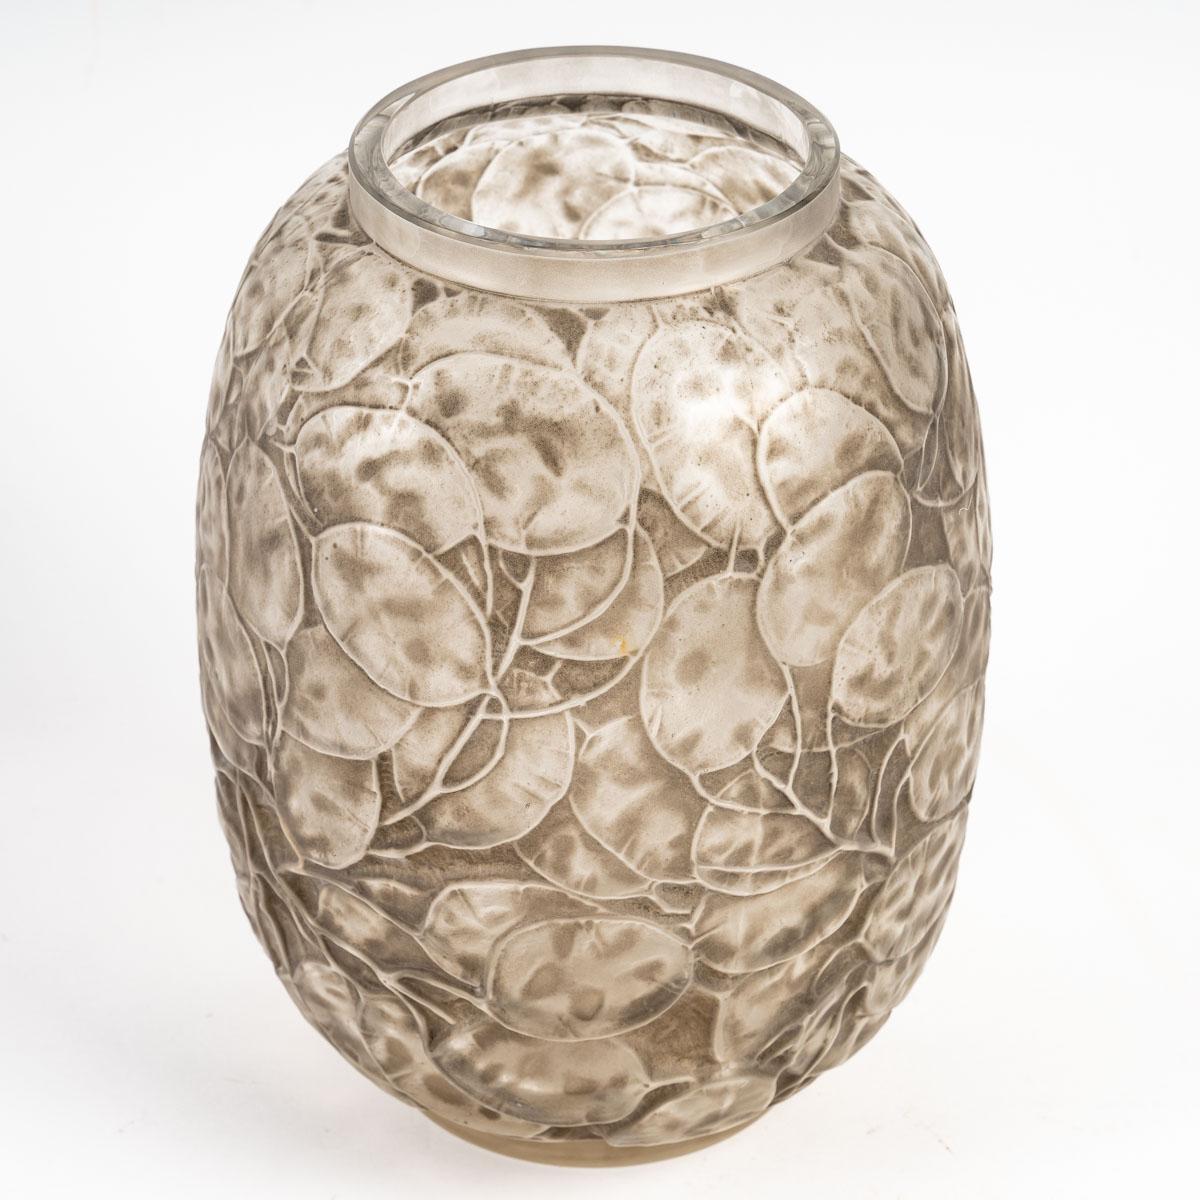 French 1914 René Lalique Monnaie du Pape Vase in Frosted Glass with Grey Patina